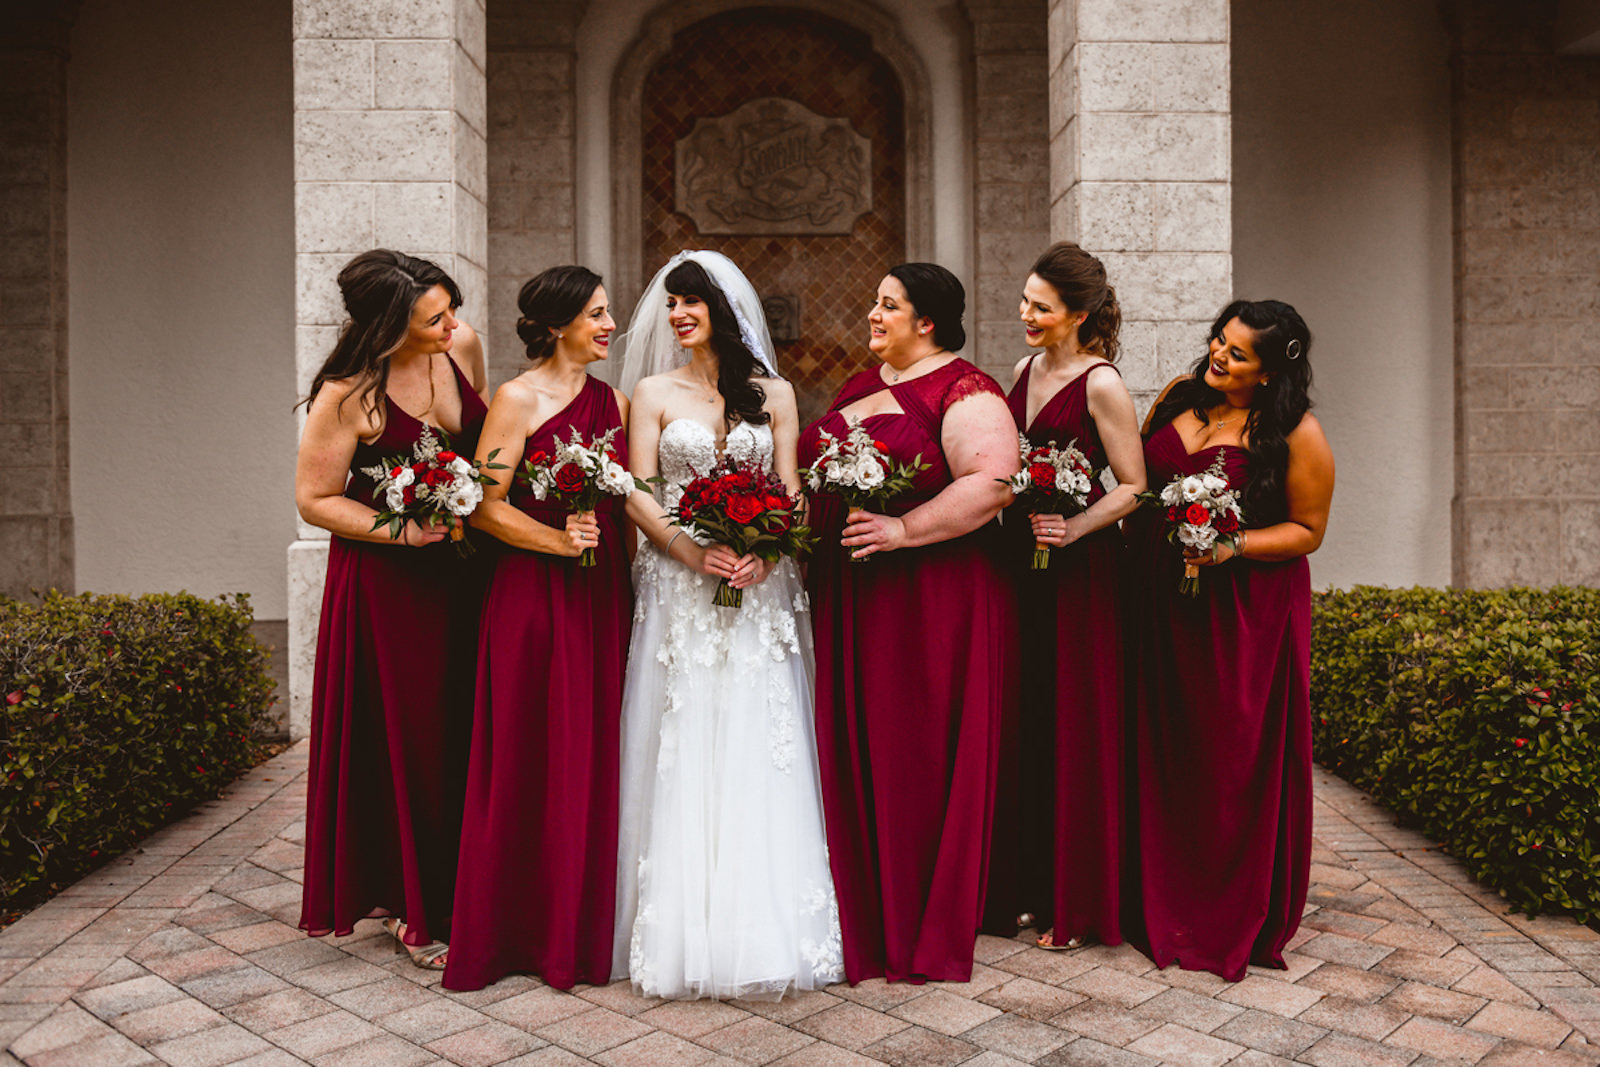 Florida Bride in Essense of Australia Strapless, Floral Applique and Tulle Skirt A-Line Wedding Dress Getting Ready with Bridesmaids in Burgundy Red Mix and Match Dresses Holding Red Floral Bouquets